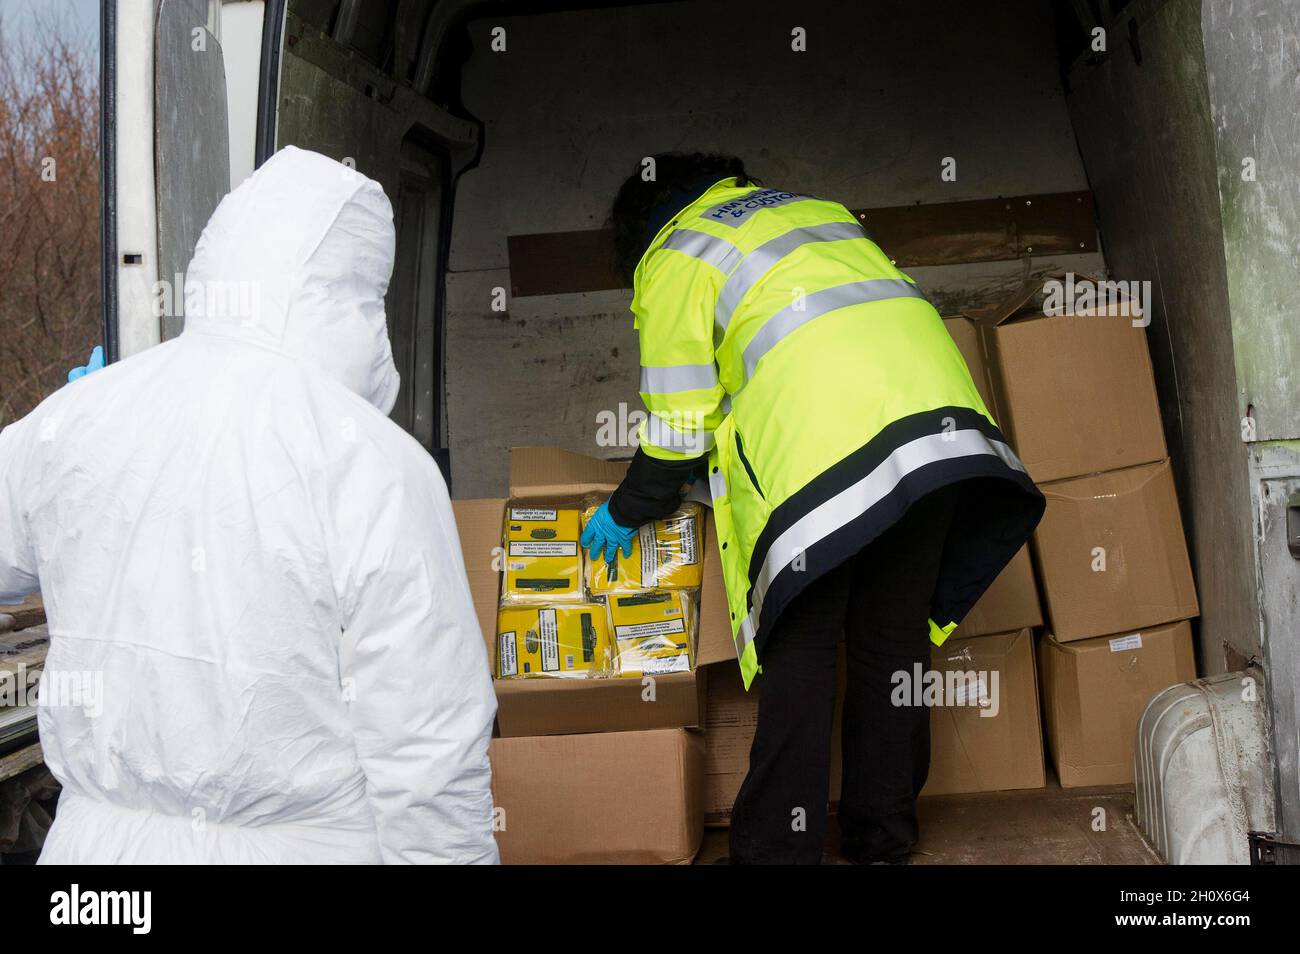 File photo dated 01/02/15 of HM Revenue and Customs officers seizing illegal tobacco. More than five million illegal cigarettes have been seized from local retail outlets in the first six months of this year, Trading Standards said. The haul of illicit products included more than 1,700kg of hand-rolled tobacco and 66kg of shisha. In total, more than £2.7 million worth of illegal tobacco products have been taken off streets across England and Wales. Stock Photo